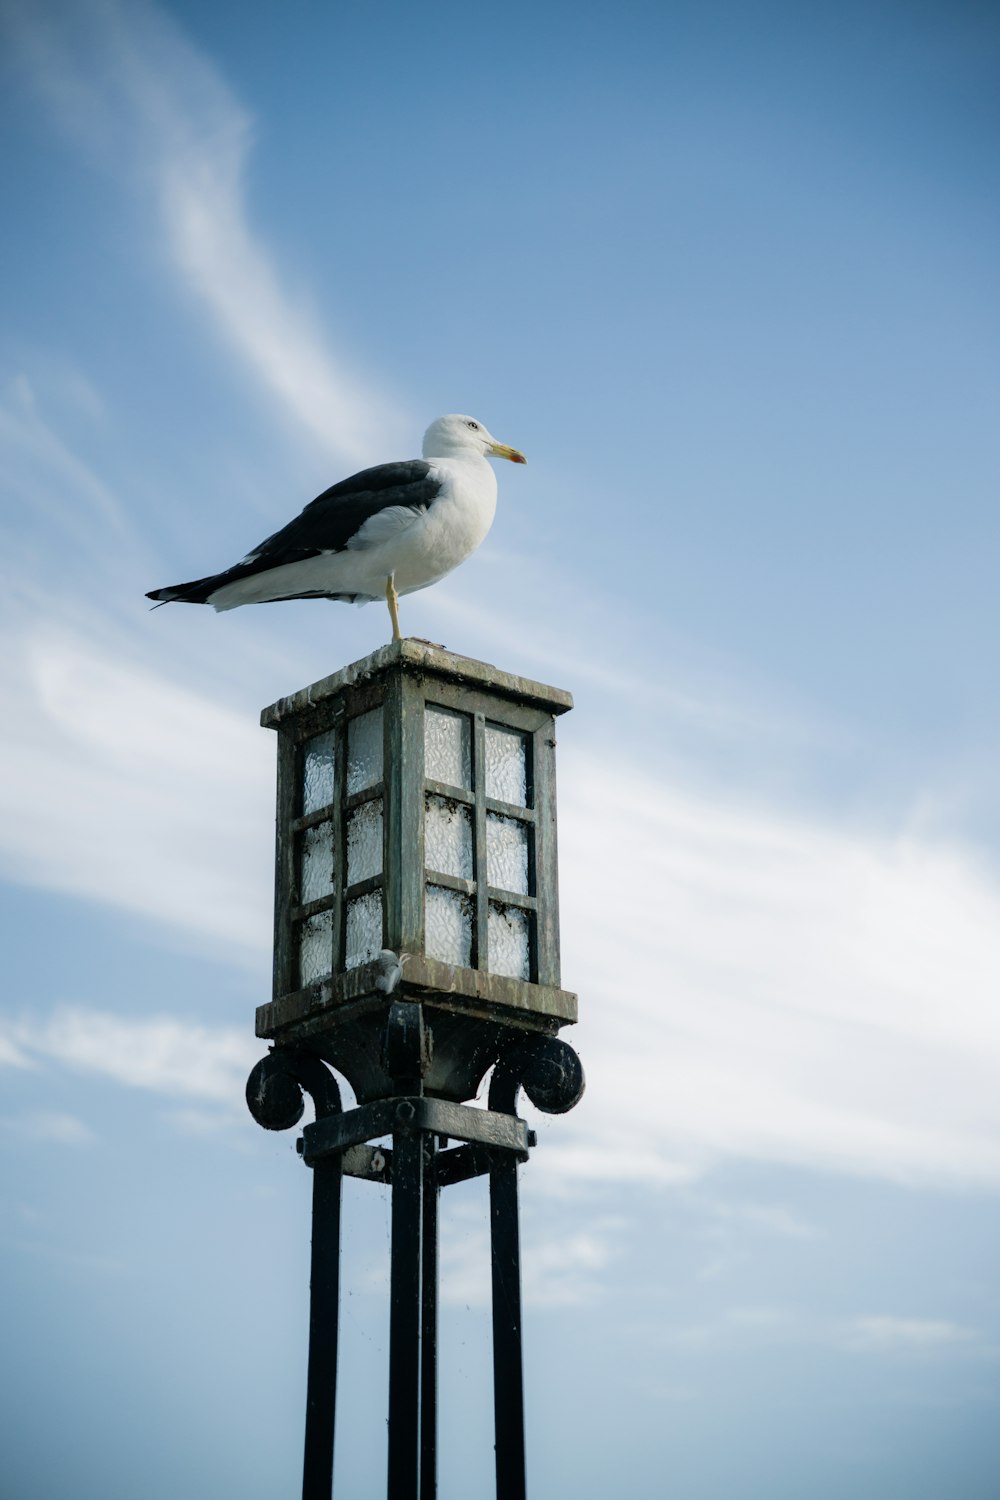 a seagull sitting on top of a light pole